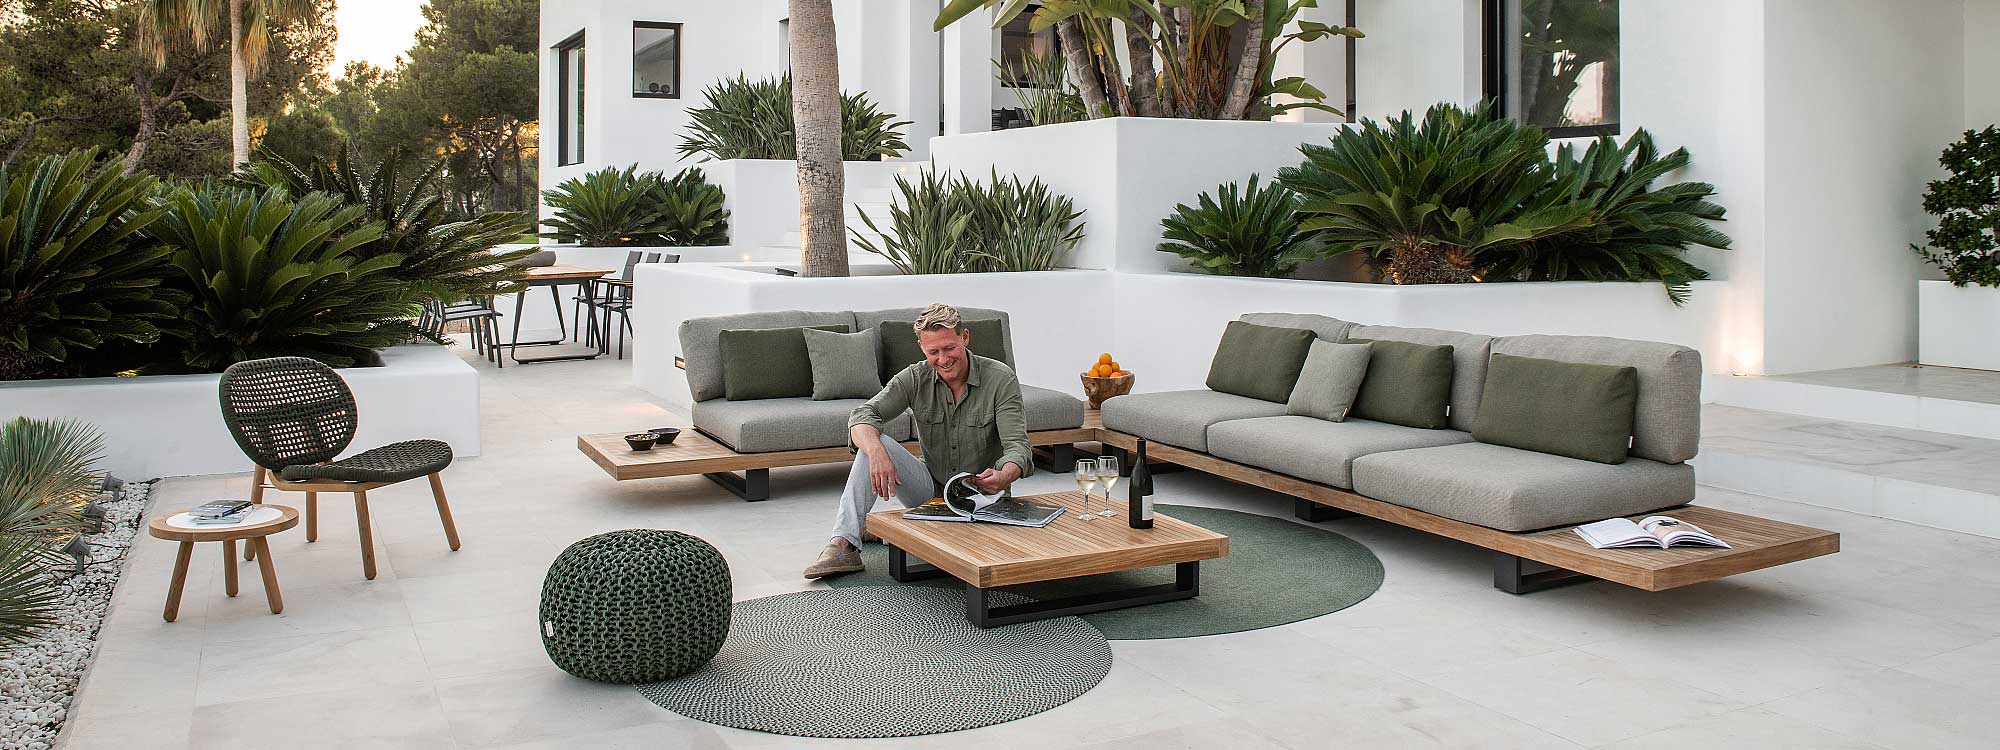 Image of man sat on floor reading a magazine in front of Truro Lounge FSC teak garden sofa, shown on white-washed terrace punctuated by exotic plants